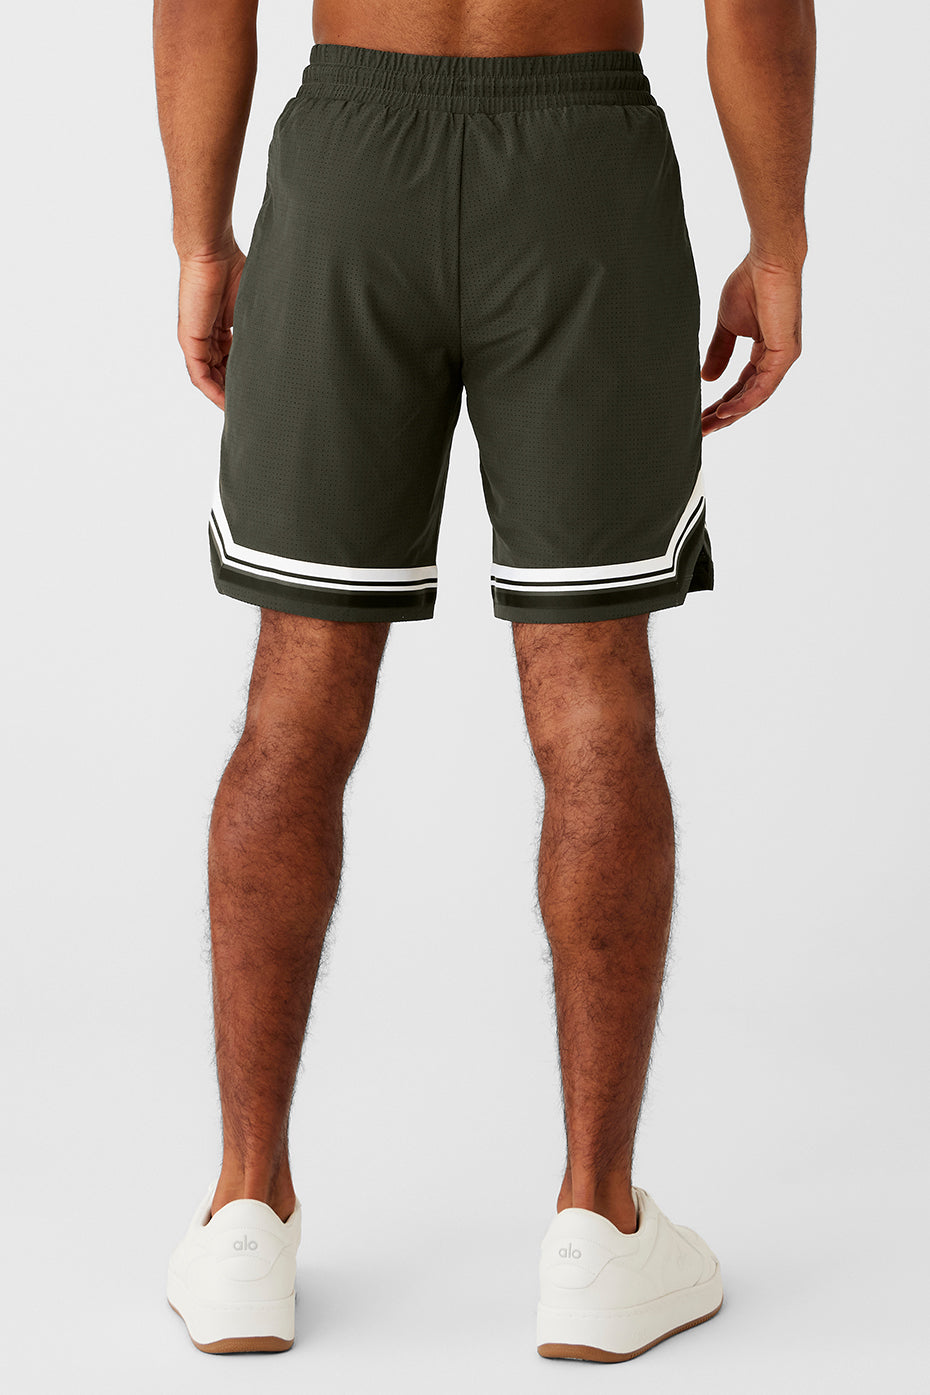 9' Traction Arena Short - Stealth Green